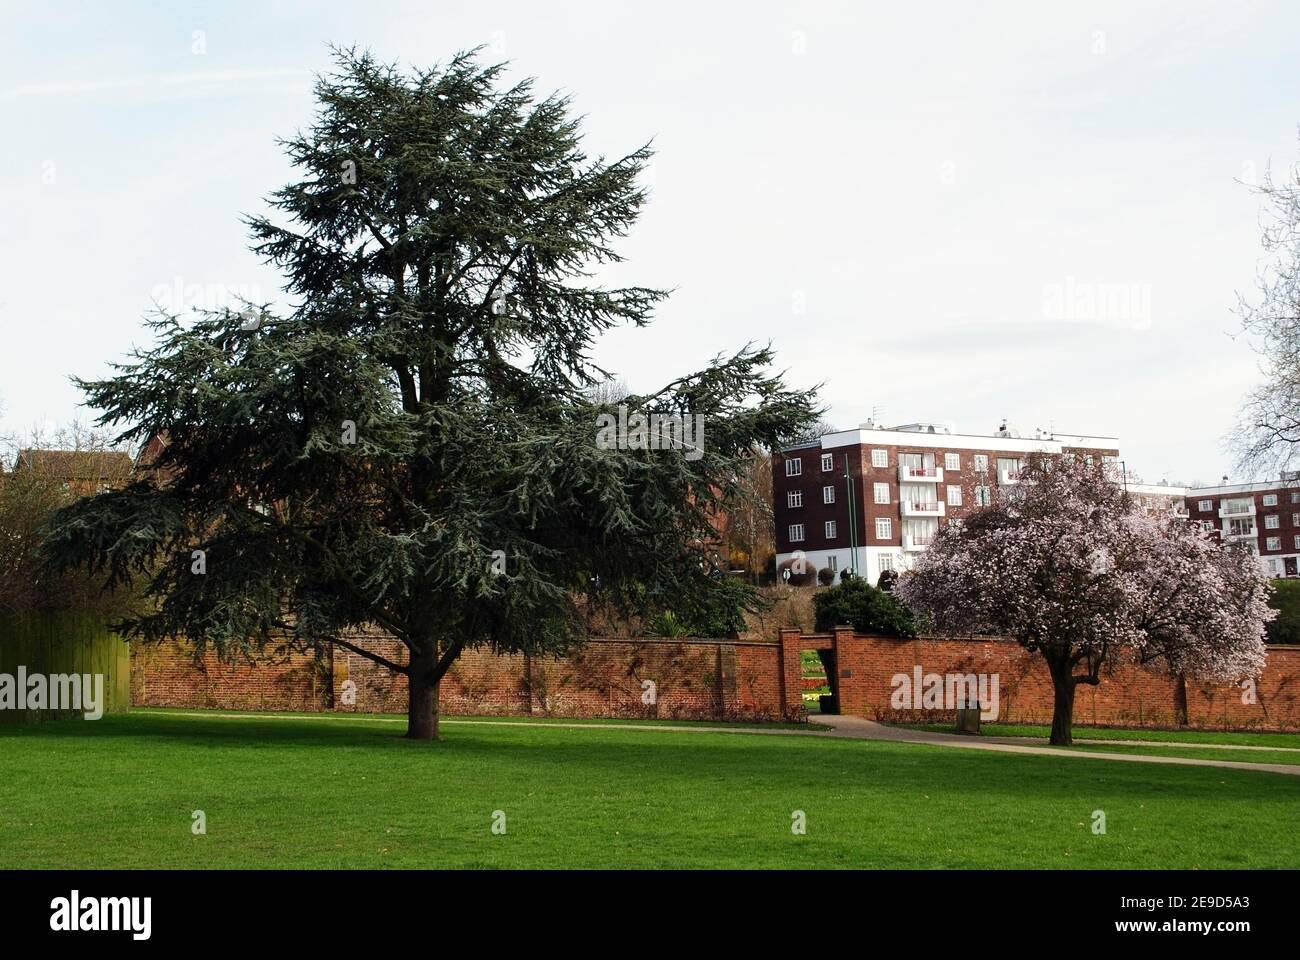 The Walled Garden in Gladstone Park, Dollis Hill, London. Stock Photo